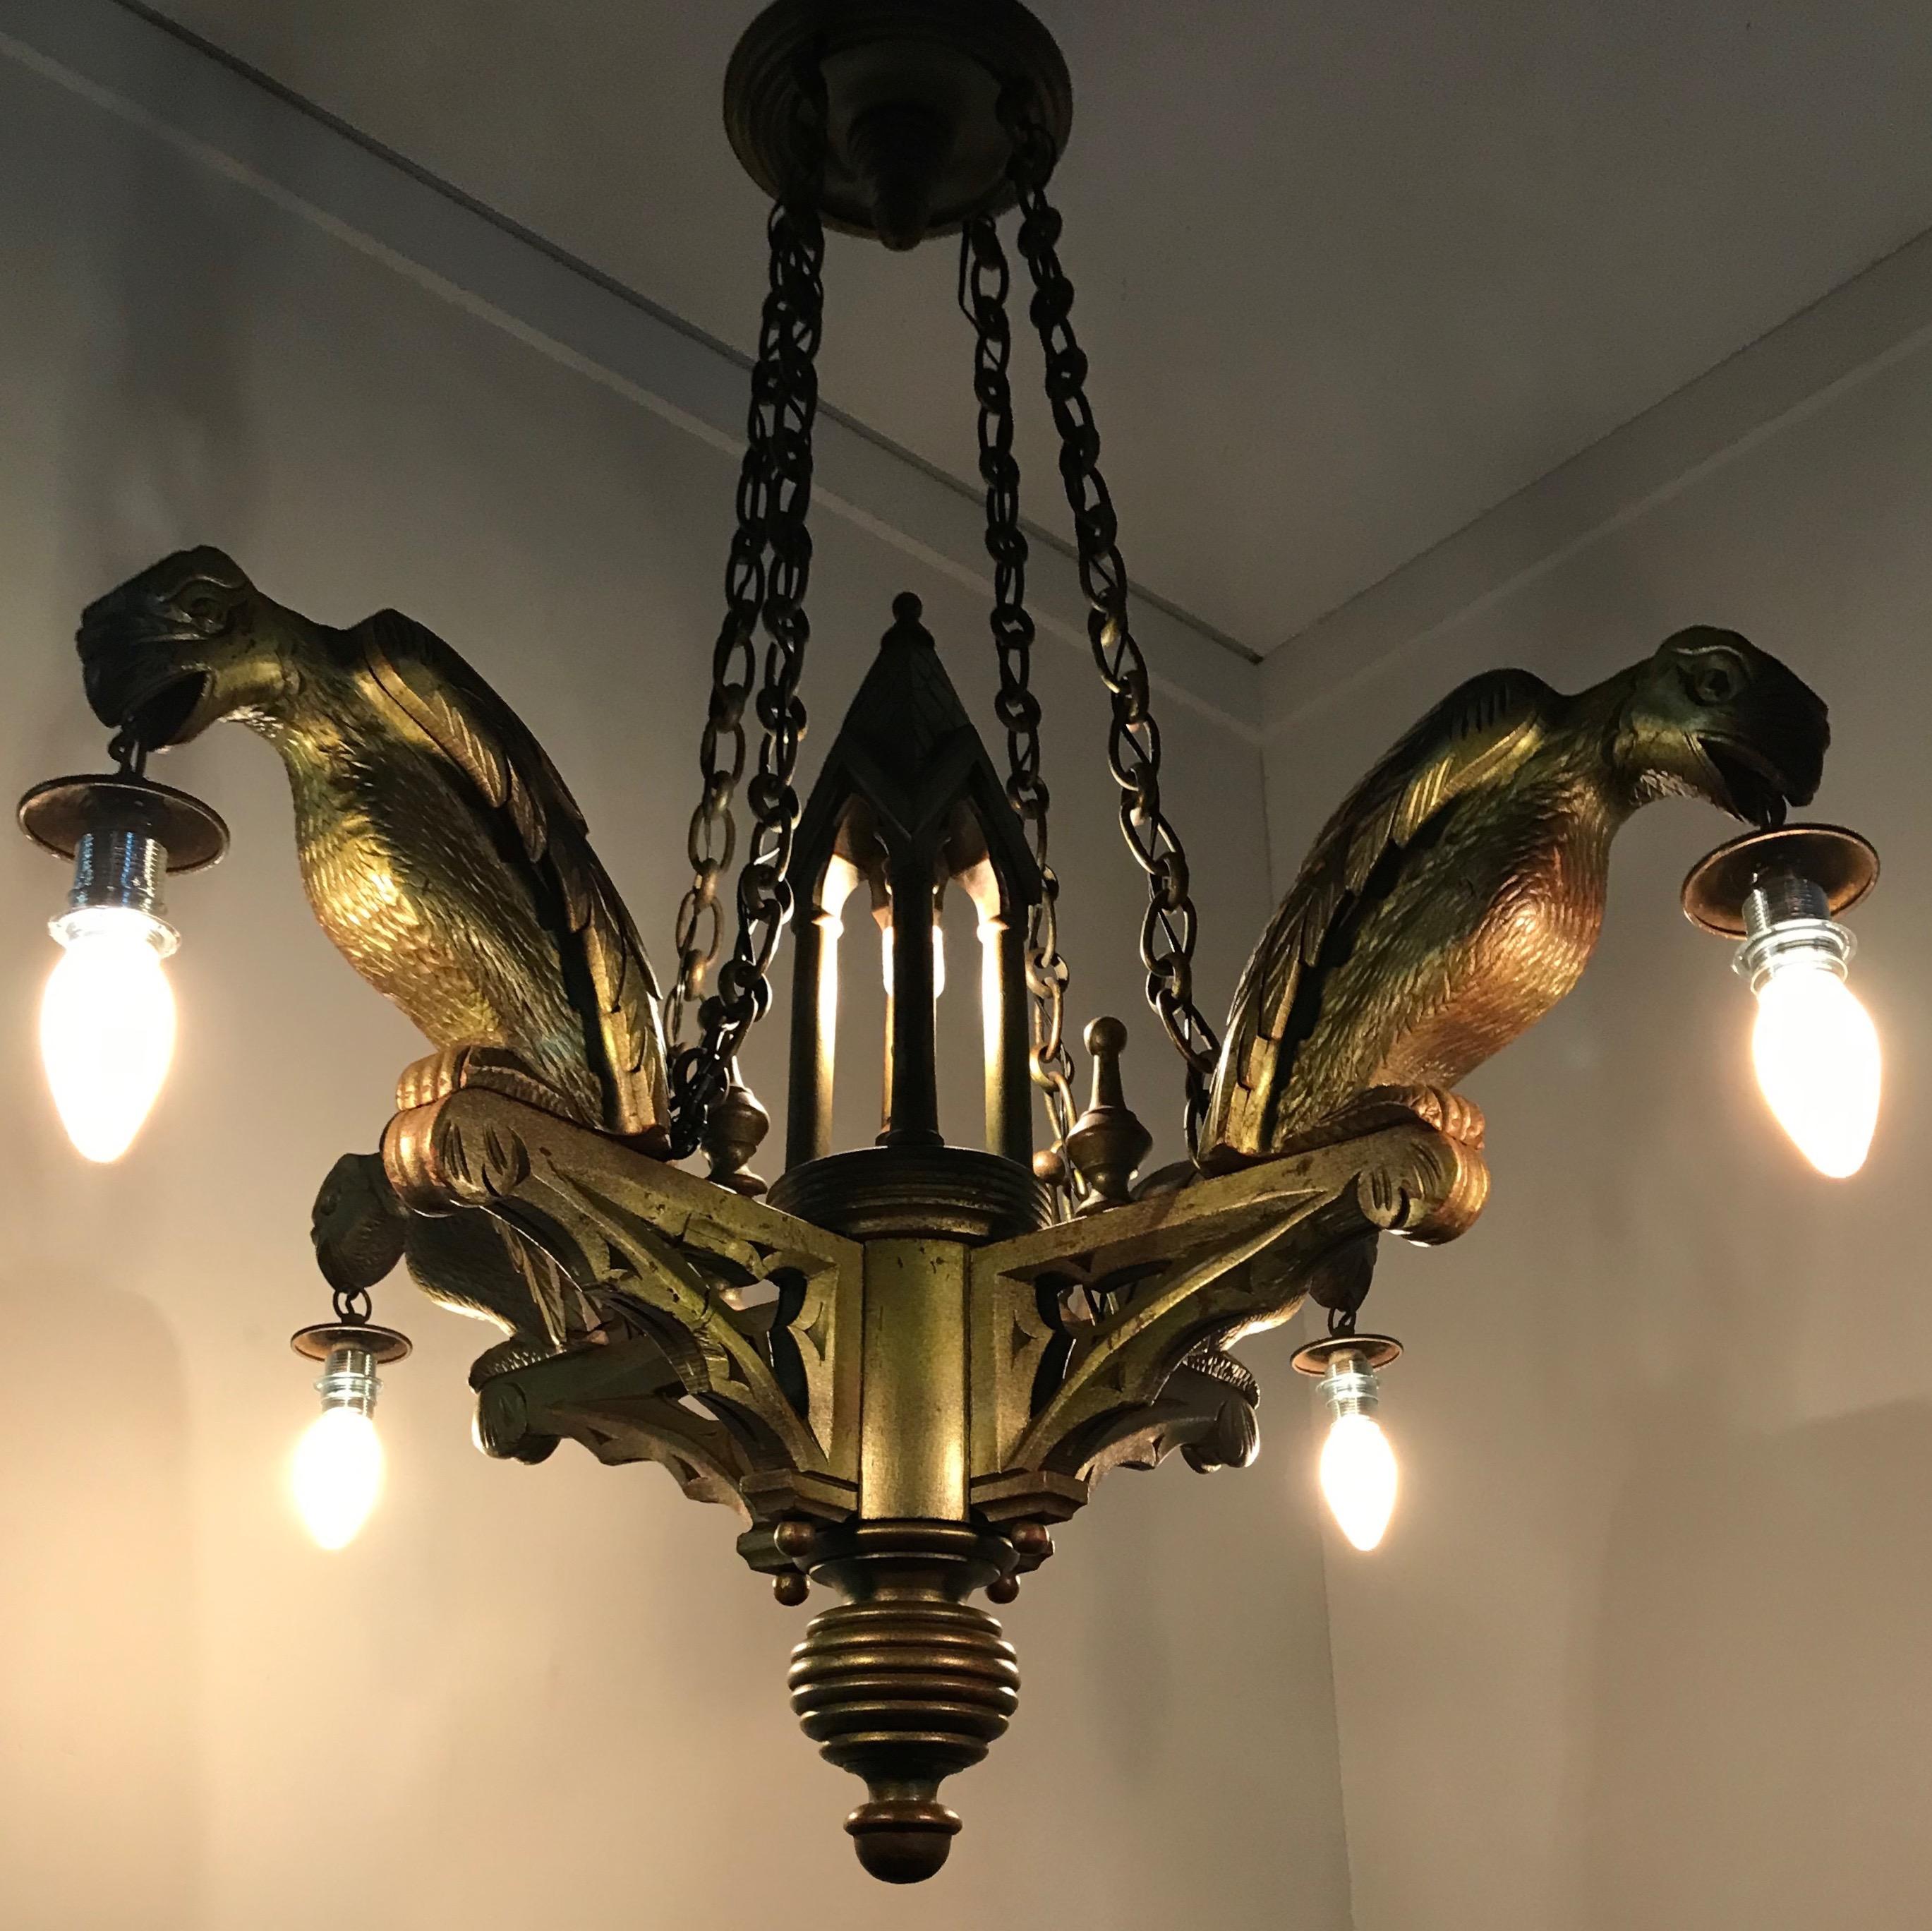 Rare Hand Carved Wooden Gothic Revival Art Chandelier with Gargoyle Sculptures For Sale 3